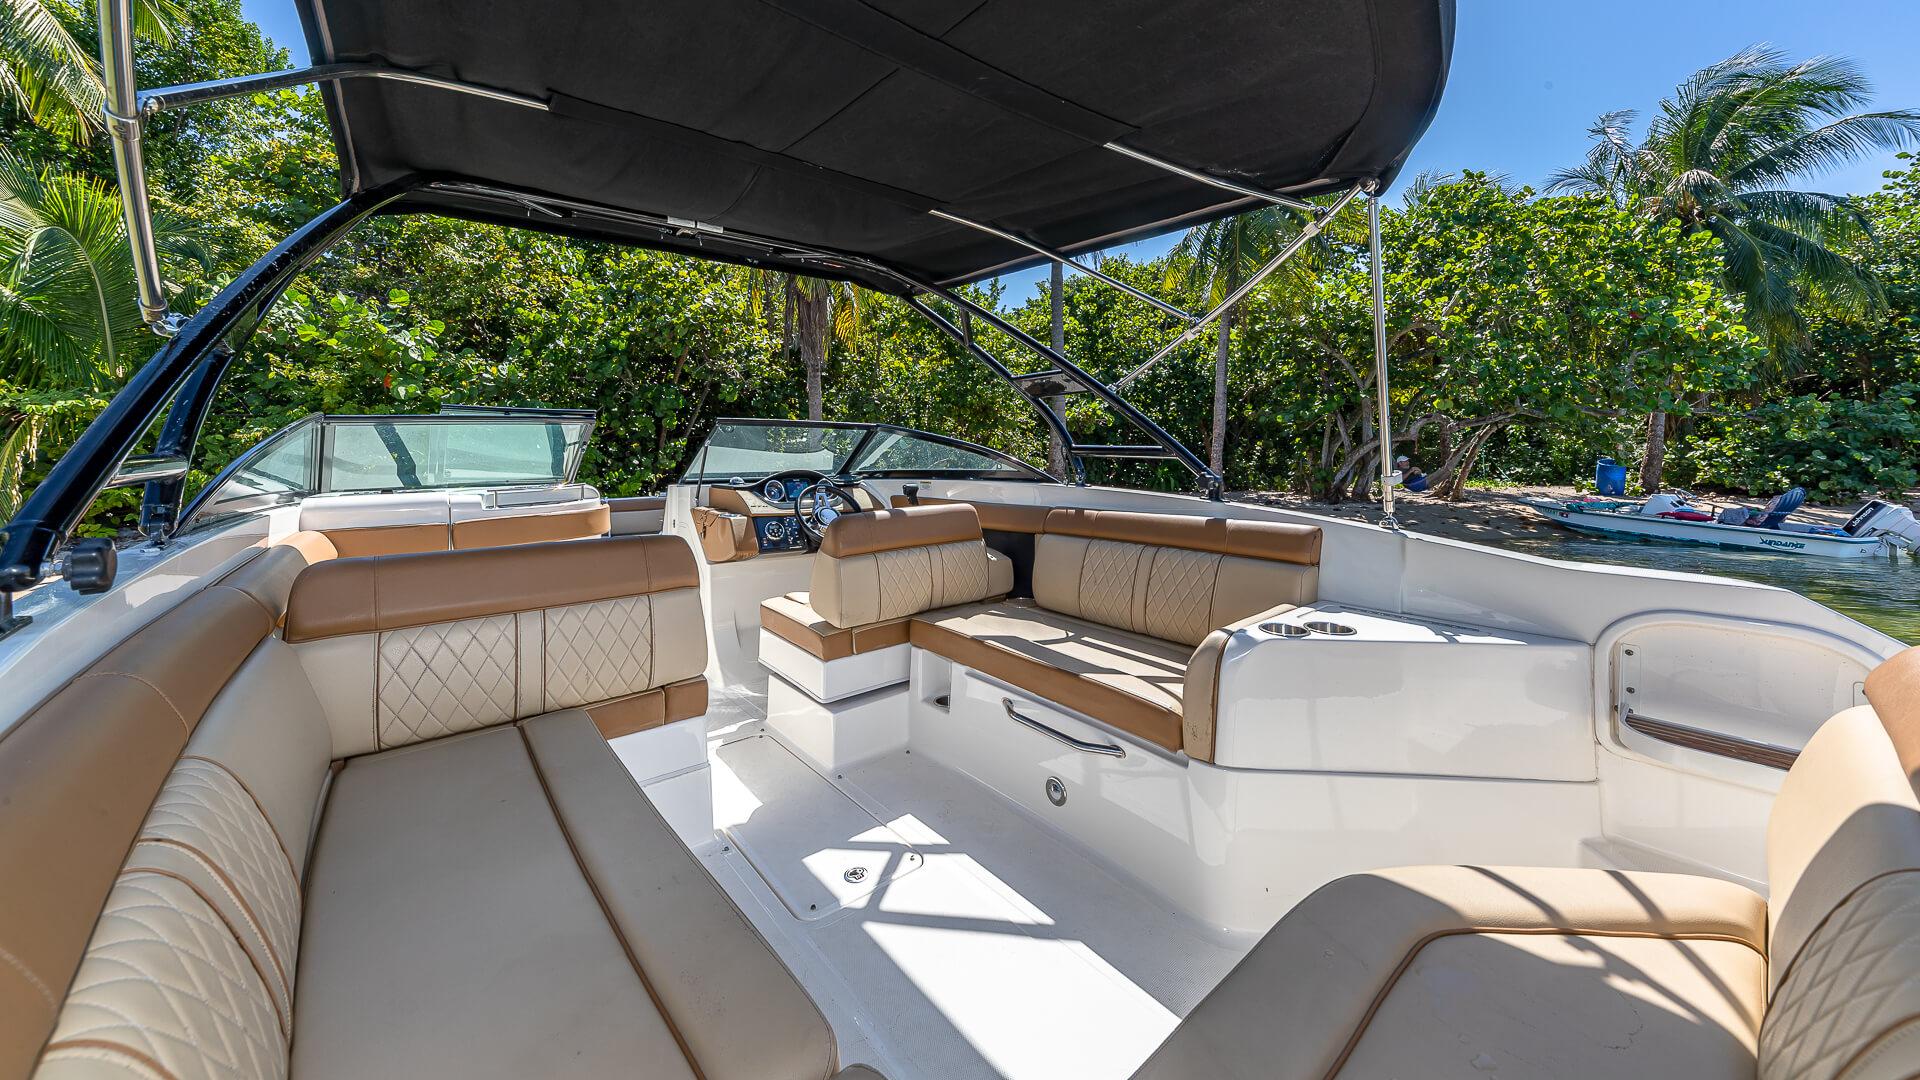 Best Miami Boat Rentals for Social Gatherings. Luxury Giant Boat Rentals.